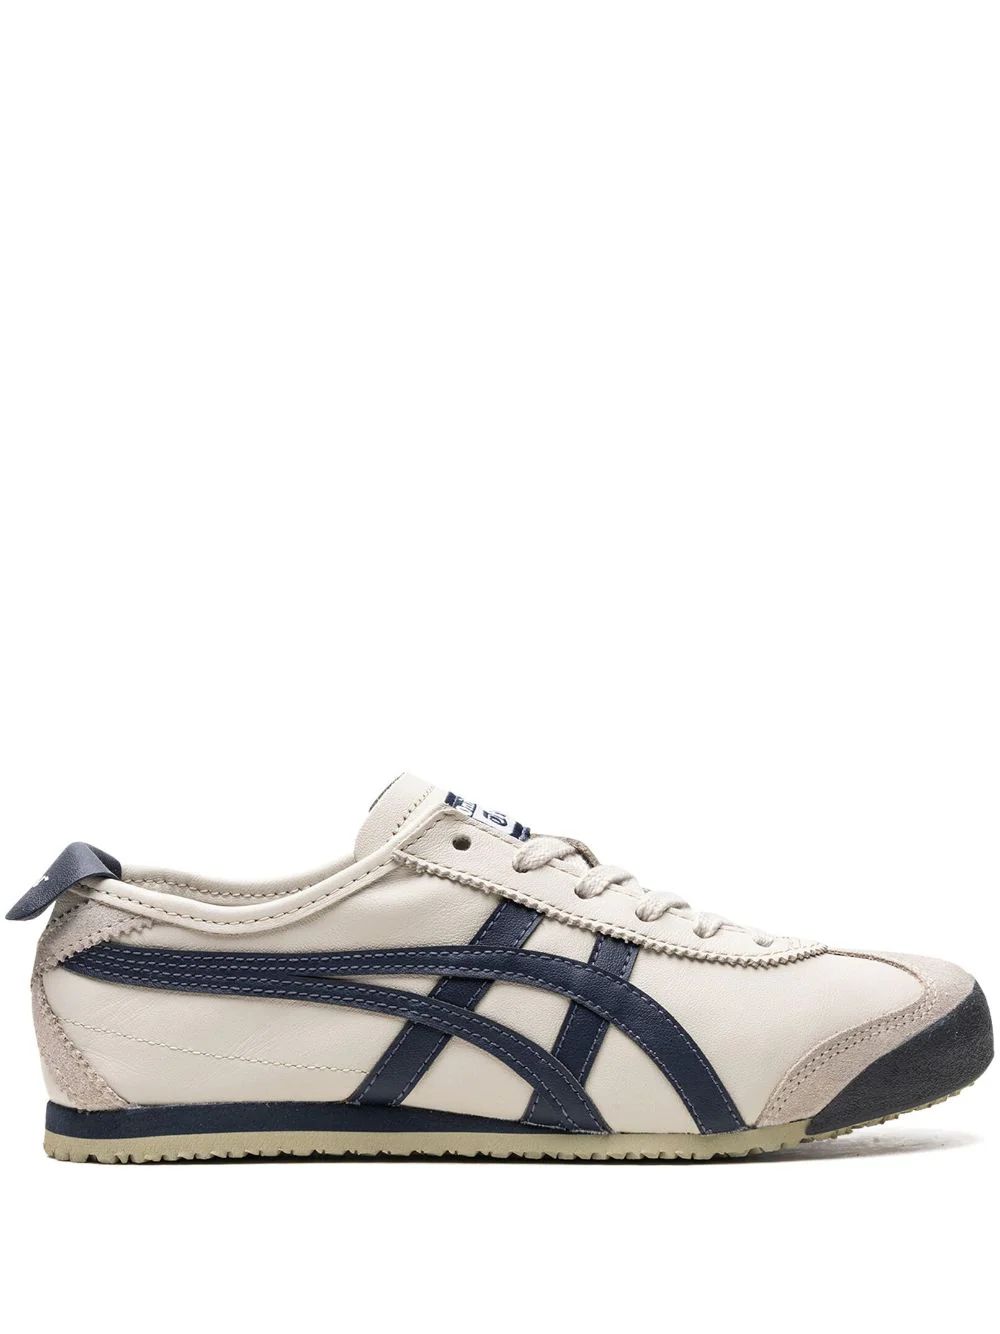 Onitsuka Tiger Mexico 66™ "Birch Peacoat" sneakers | Farfetch Global